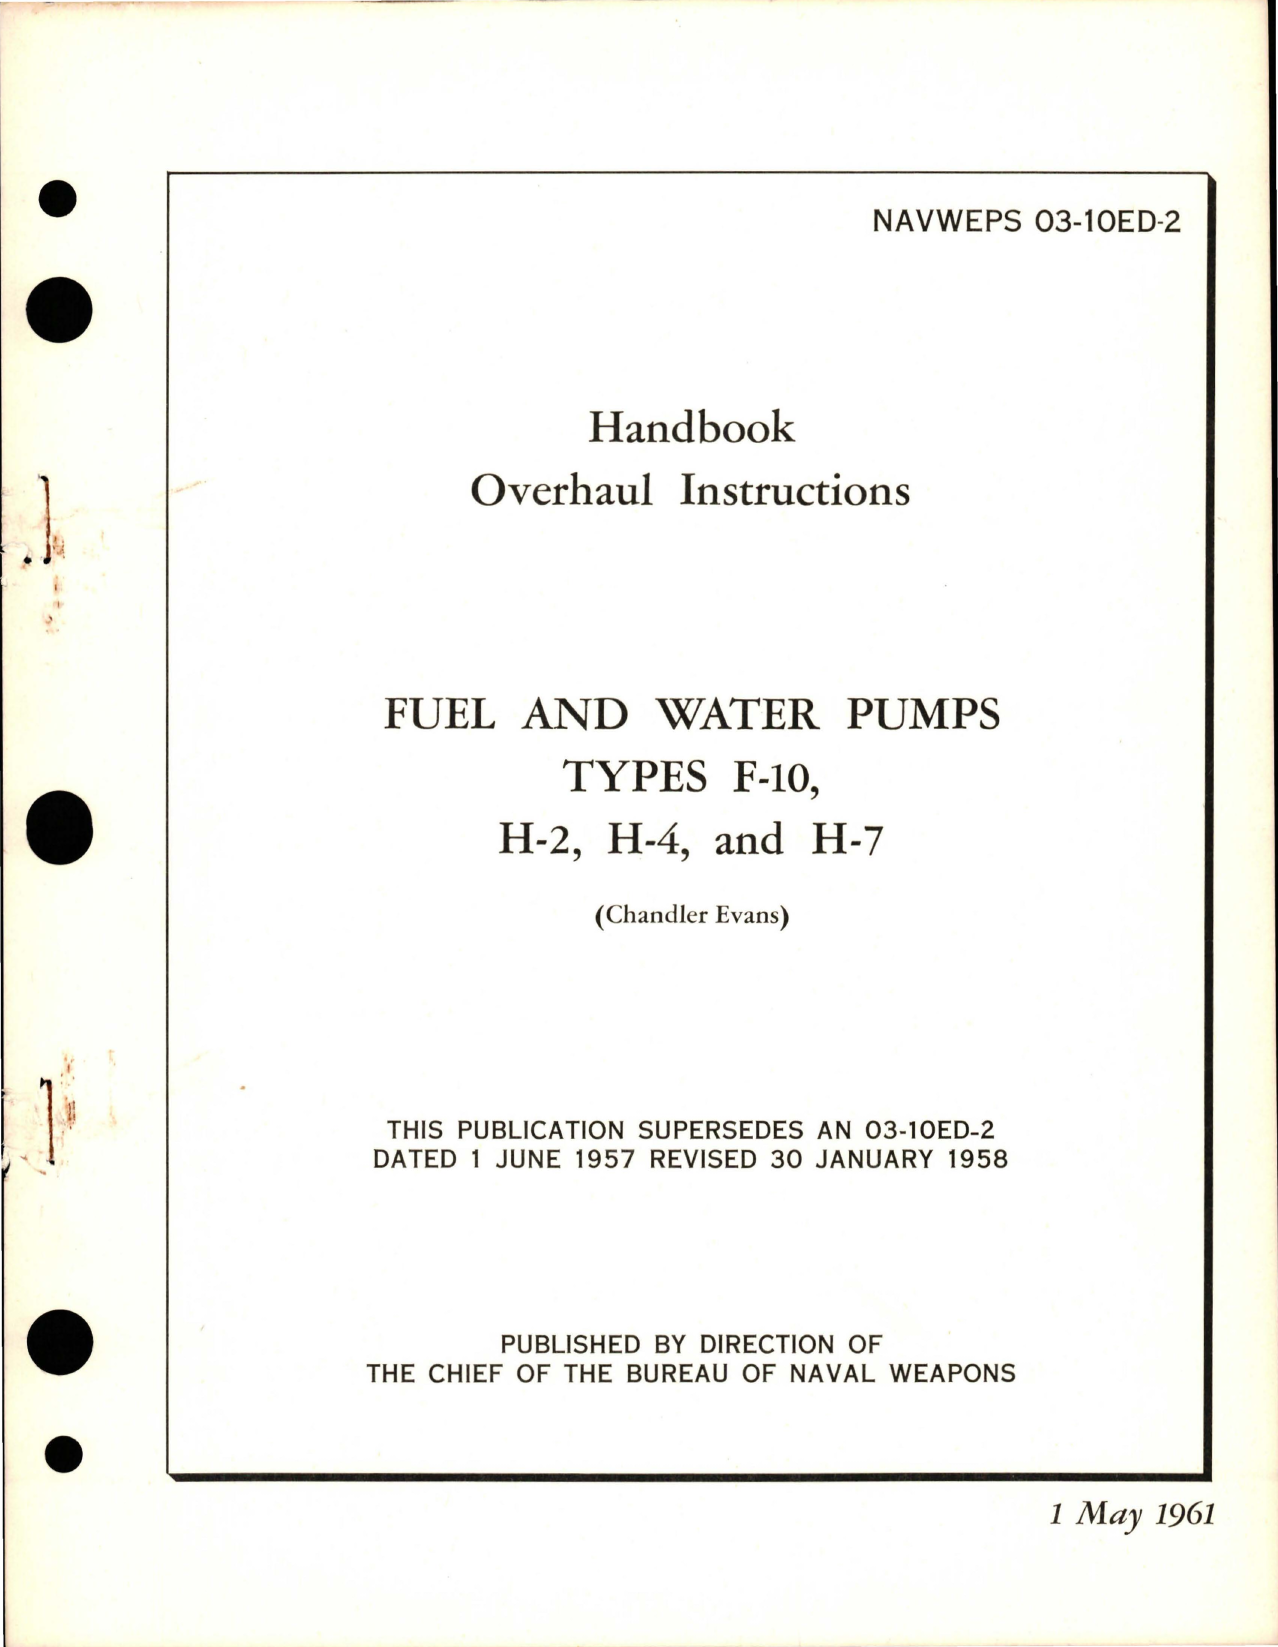 Sample page 1 from AirCorps Library document: Overhaul Instructions for Fuel and Water Pumps - Types F-10, H-2, H-4 and H-7